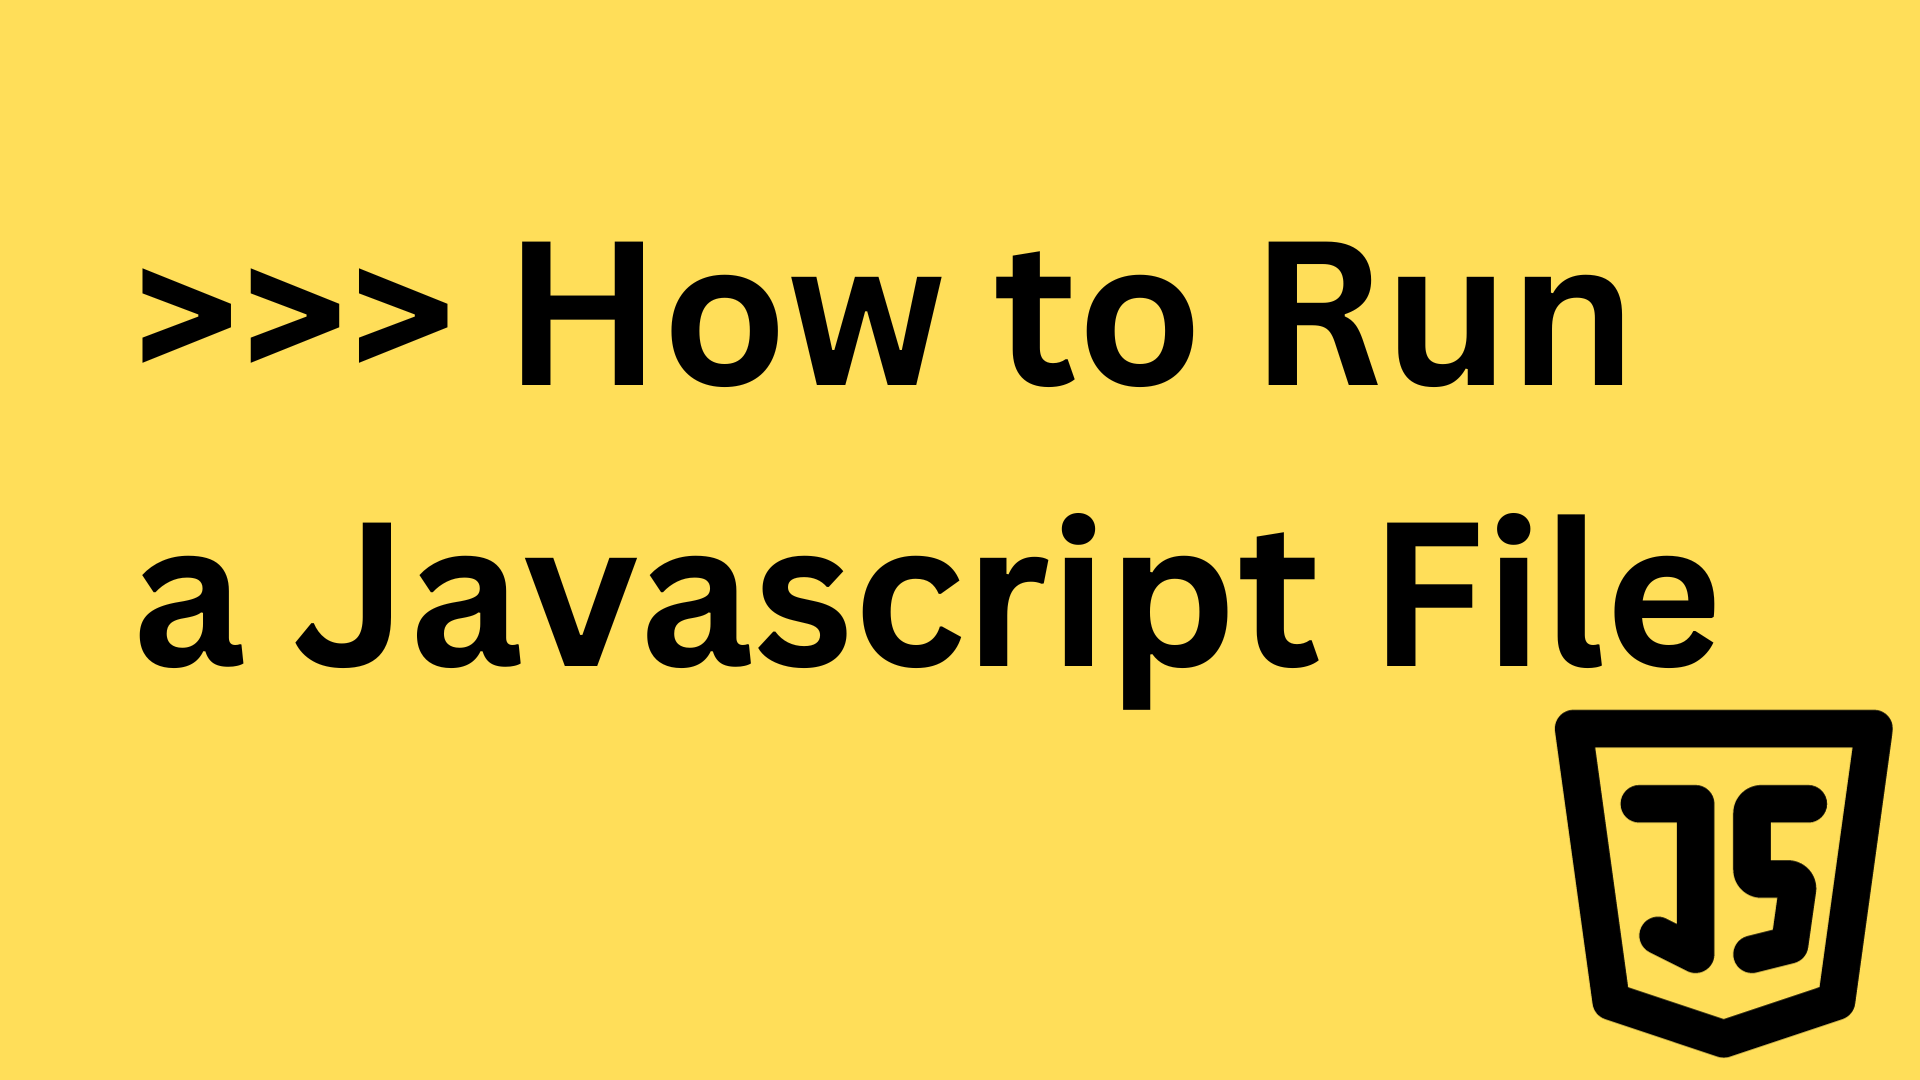 How to Run a JavaScript File